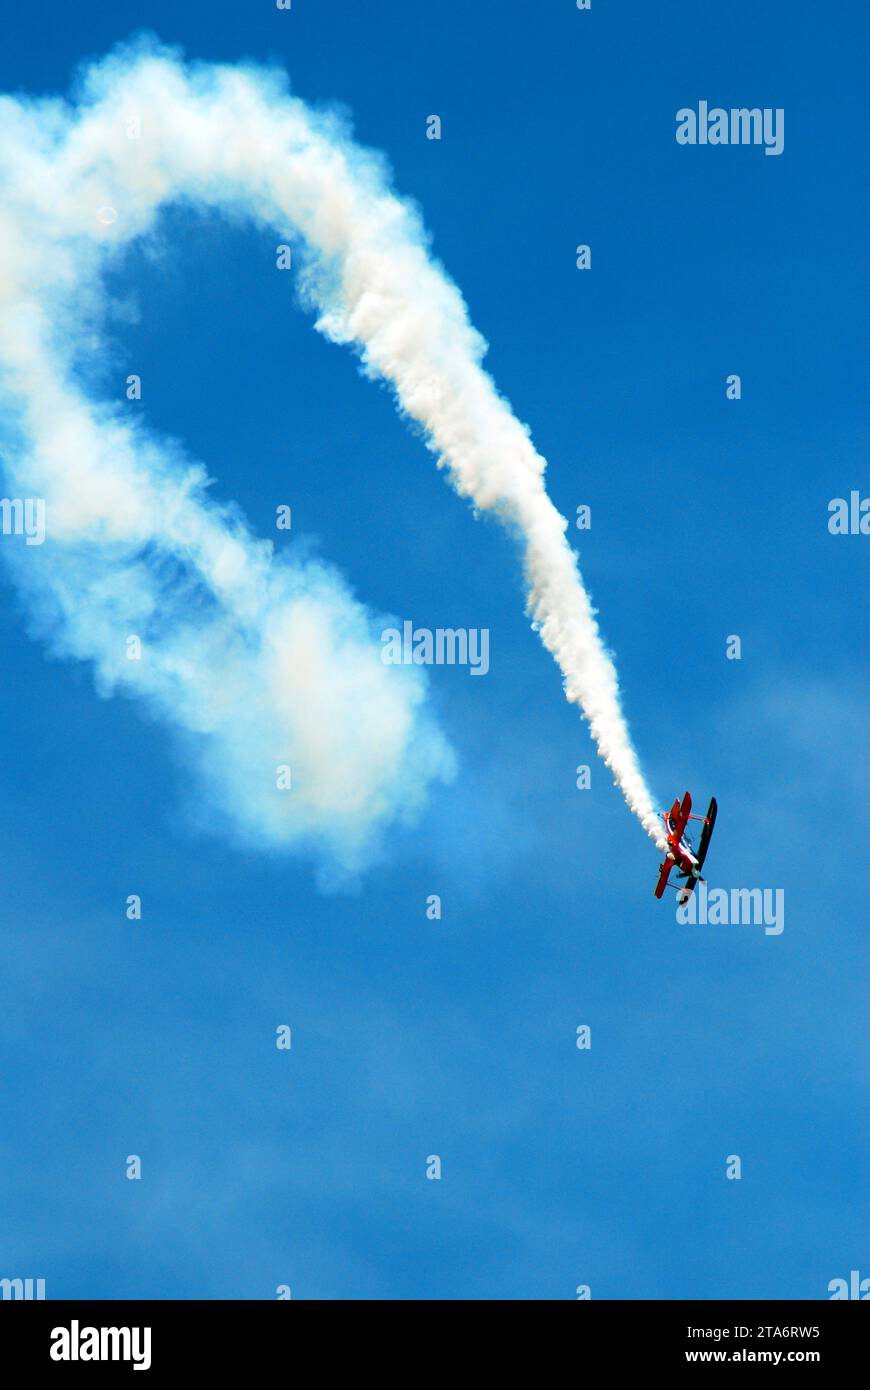 A stunt pilot performs flips and spins as he demonstrates precision flying at an air show Stock Photo